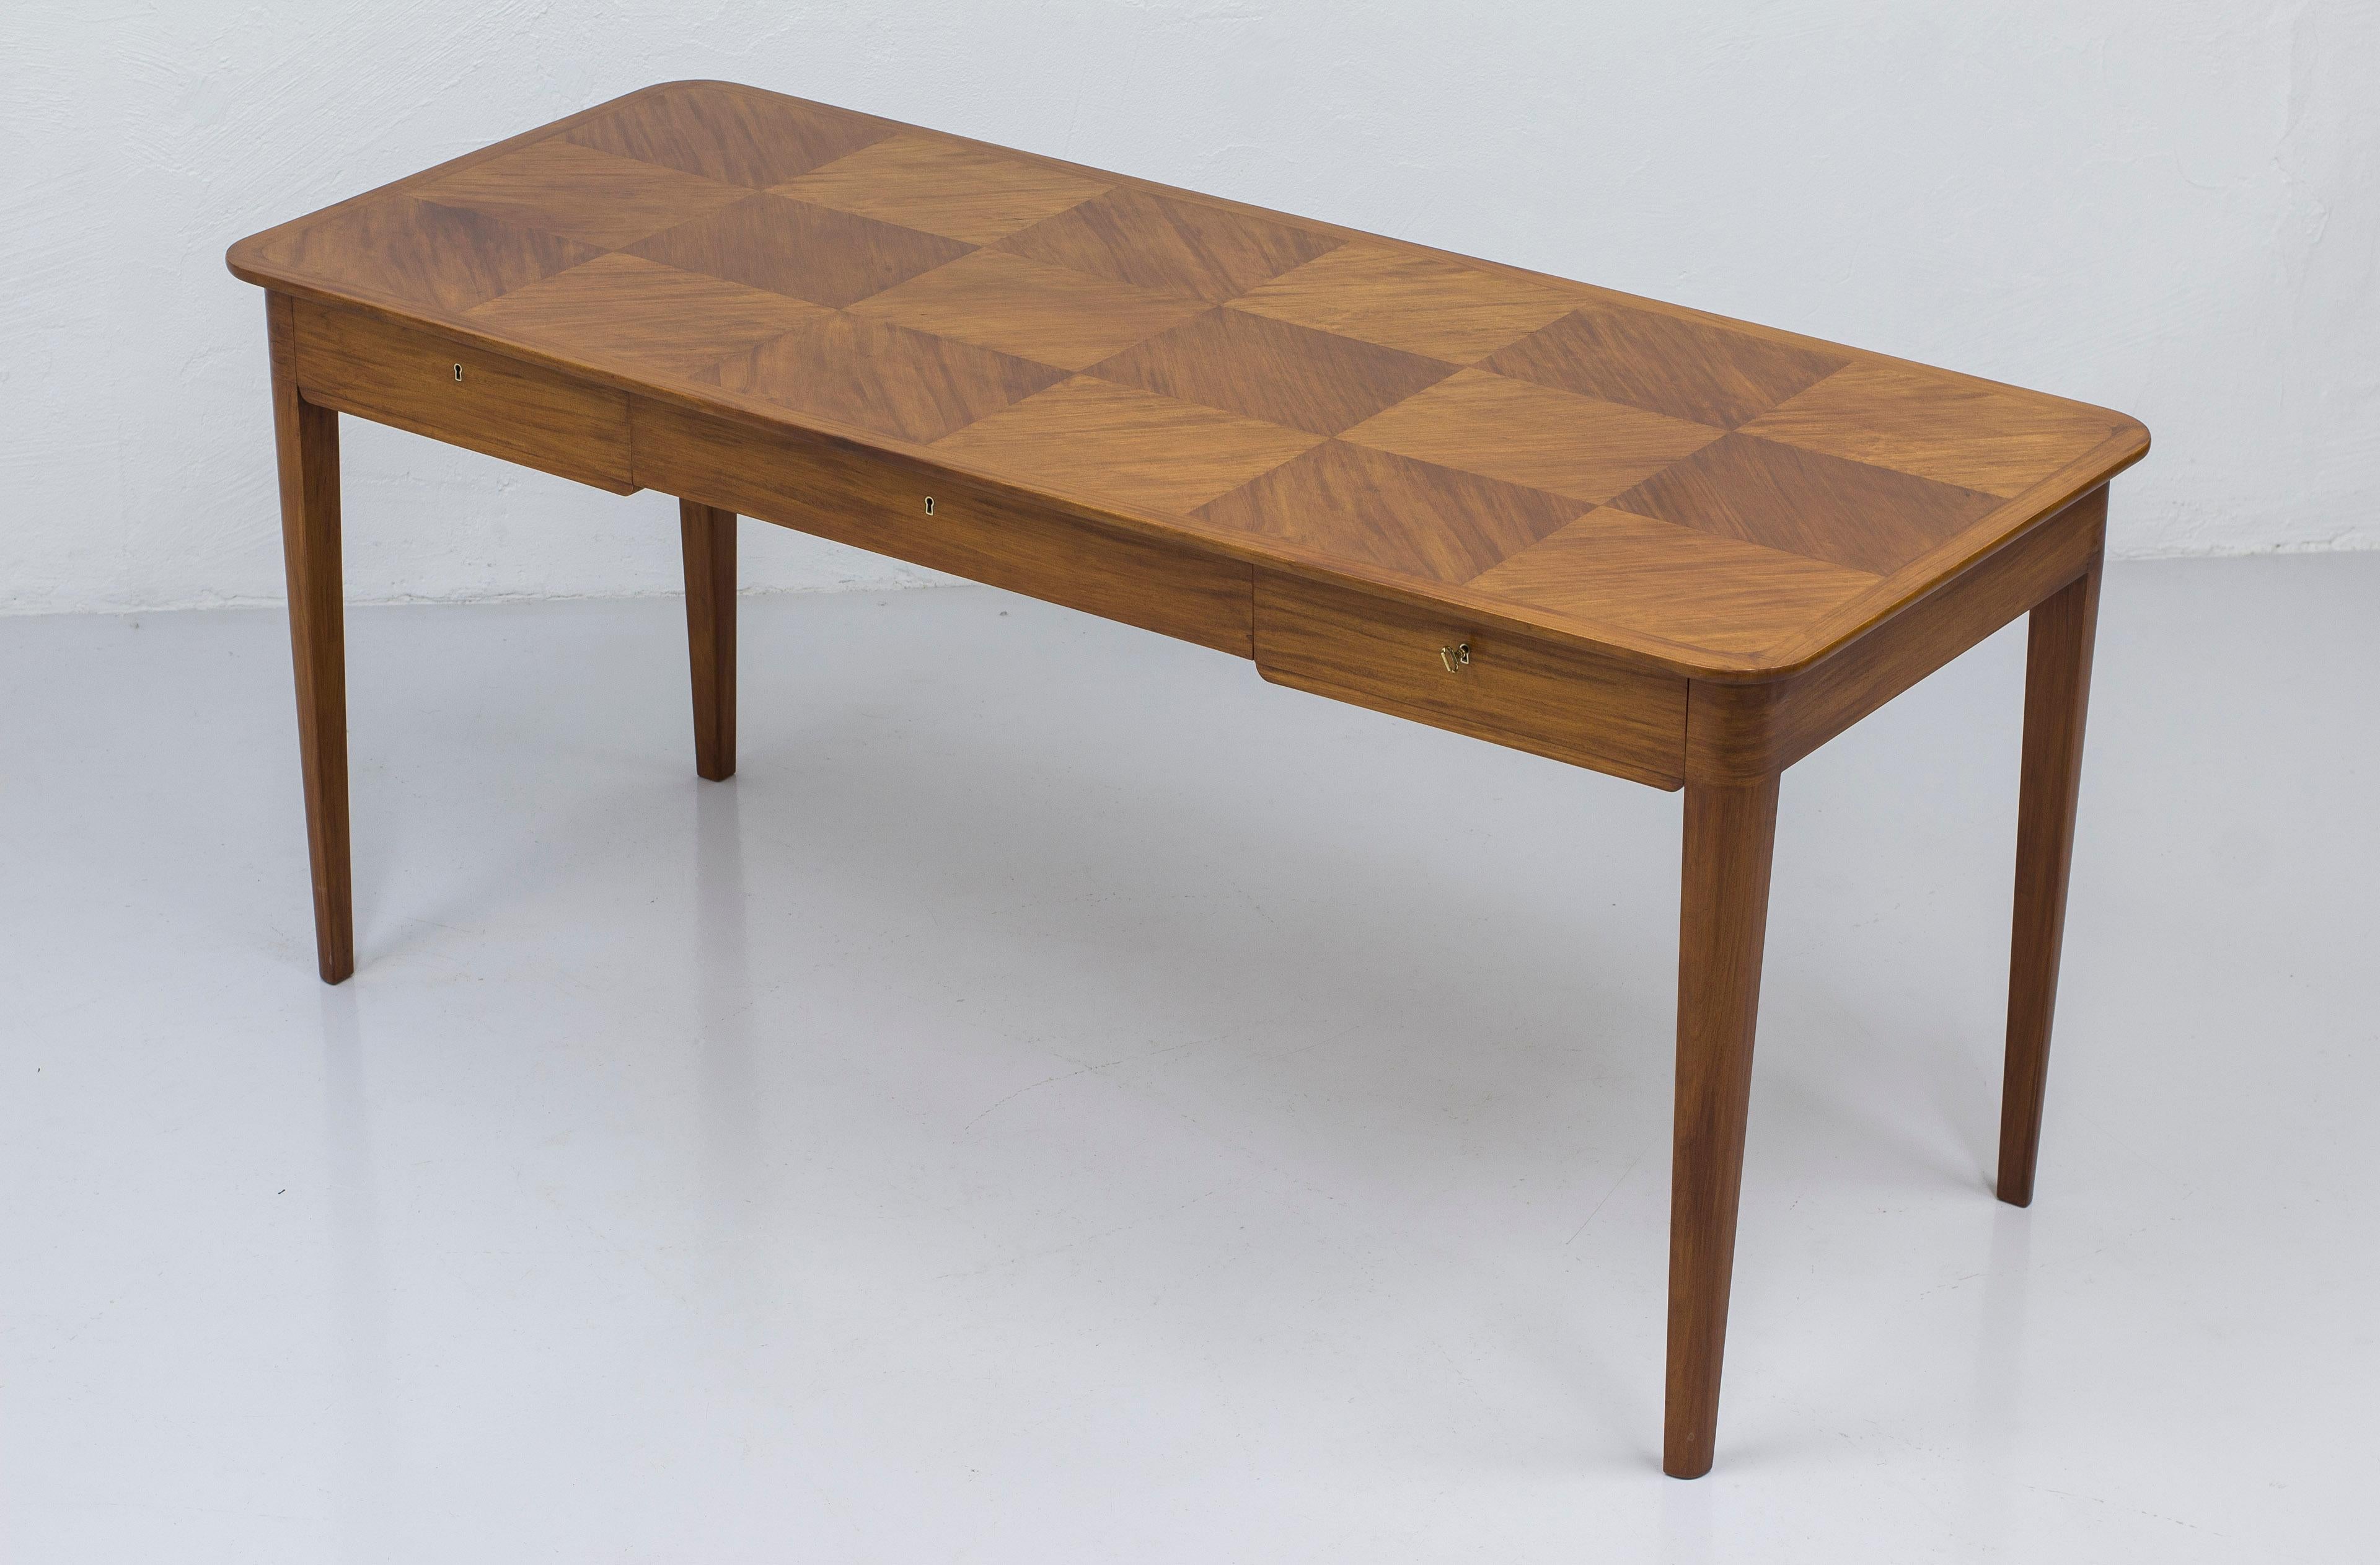 Swedish modern desk designed by interior architect Oscar Nilsson. Produced in Stockholm, Sweden by Cabinetmaker Allan Lindgren in 1938. Made from fruitwood with beautiful checker pattern on the table top. Beautifully crafted with solid wood on the